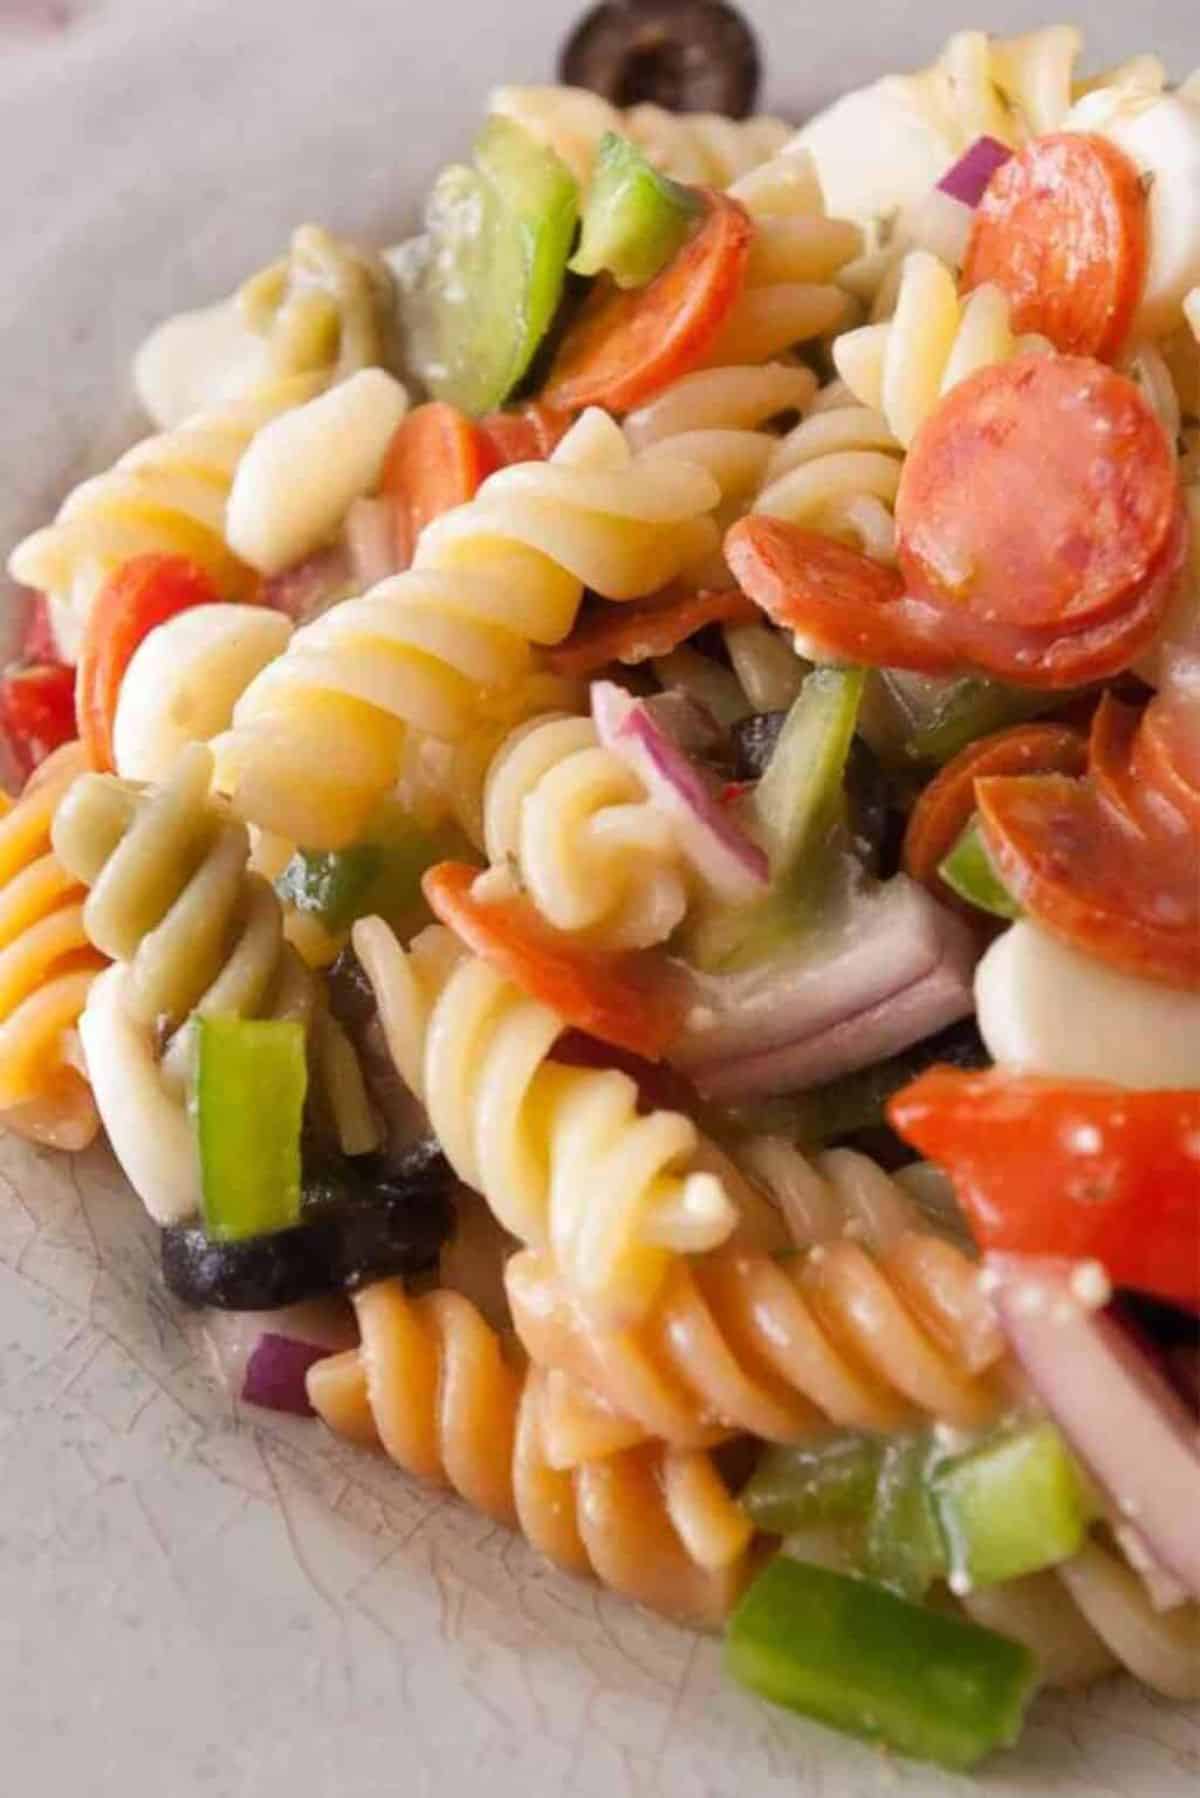 Delicious Italian Pasta Salad on a plate.